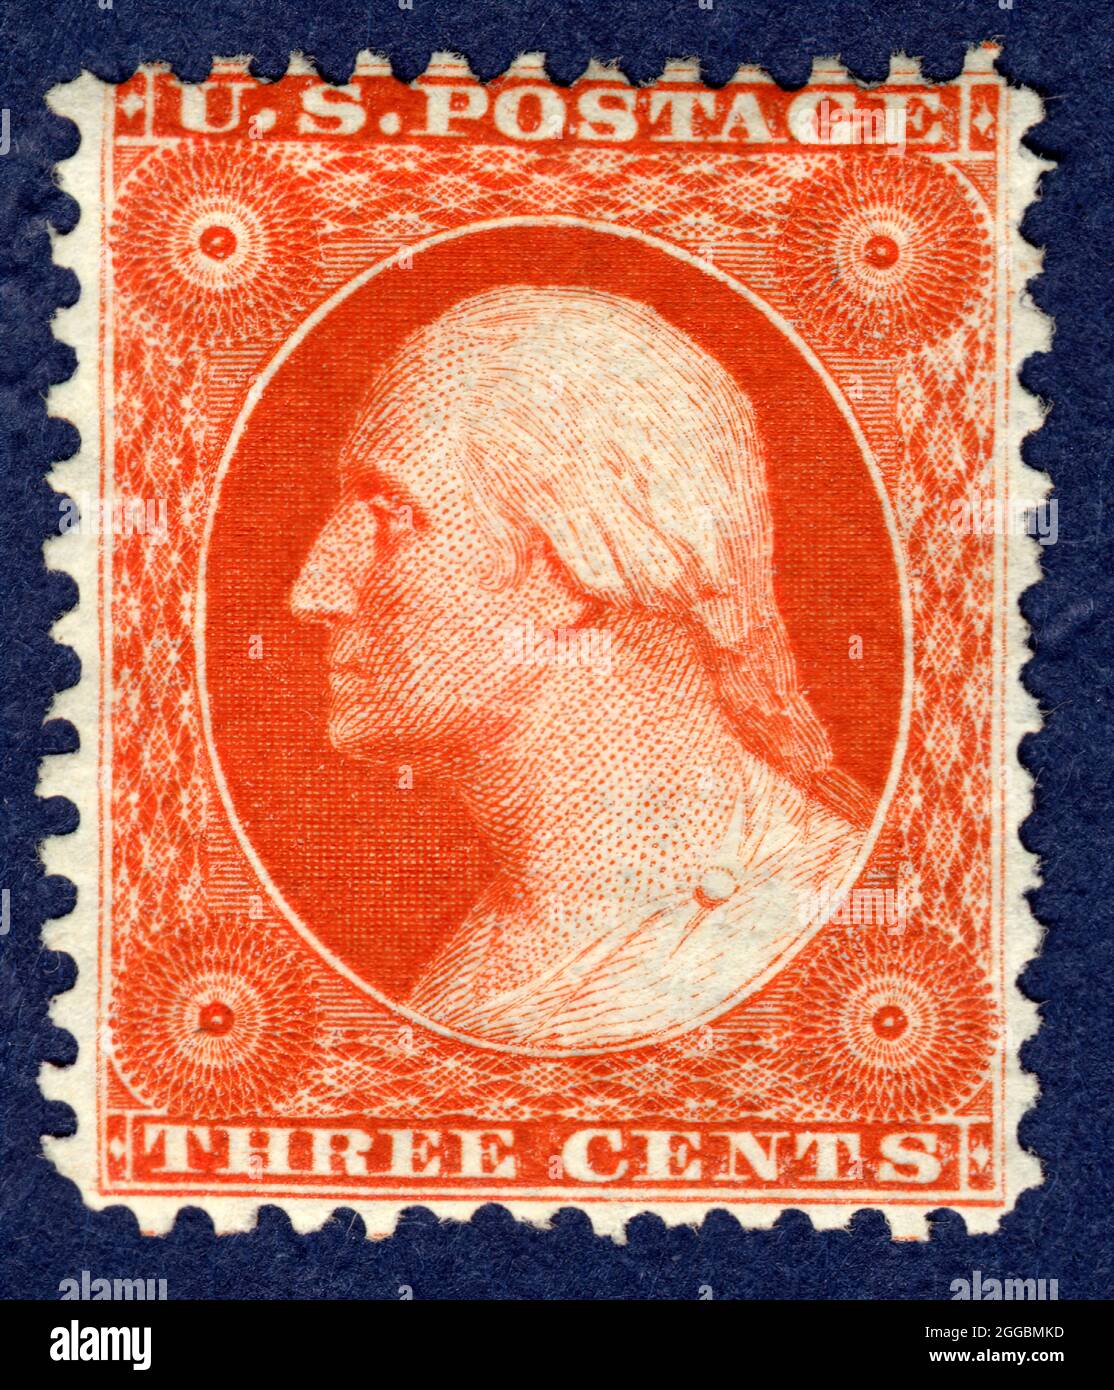 3c Washington reprint single, 1875. Unused;In 1875, Post Office Department officials decided to exhibit samples of all previously issued stamps at the Centennial Exposition in Philadelphia the following year. Since this required a special printing, the department ordered extra copies for sale to stamp collectors. Stock Photo